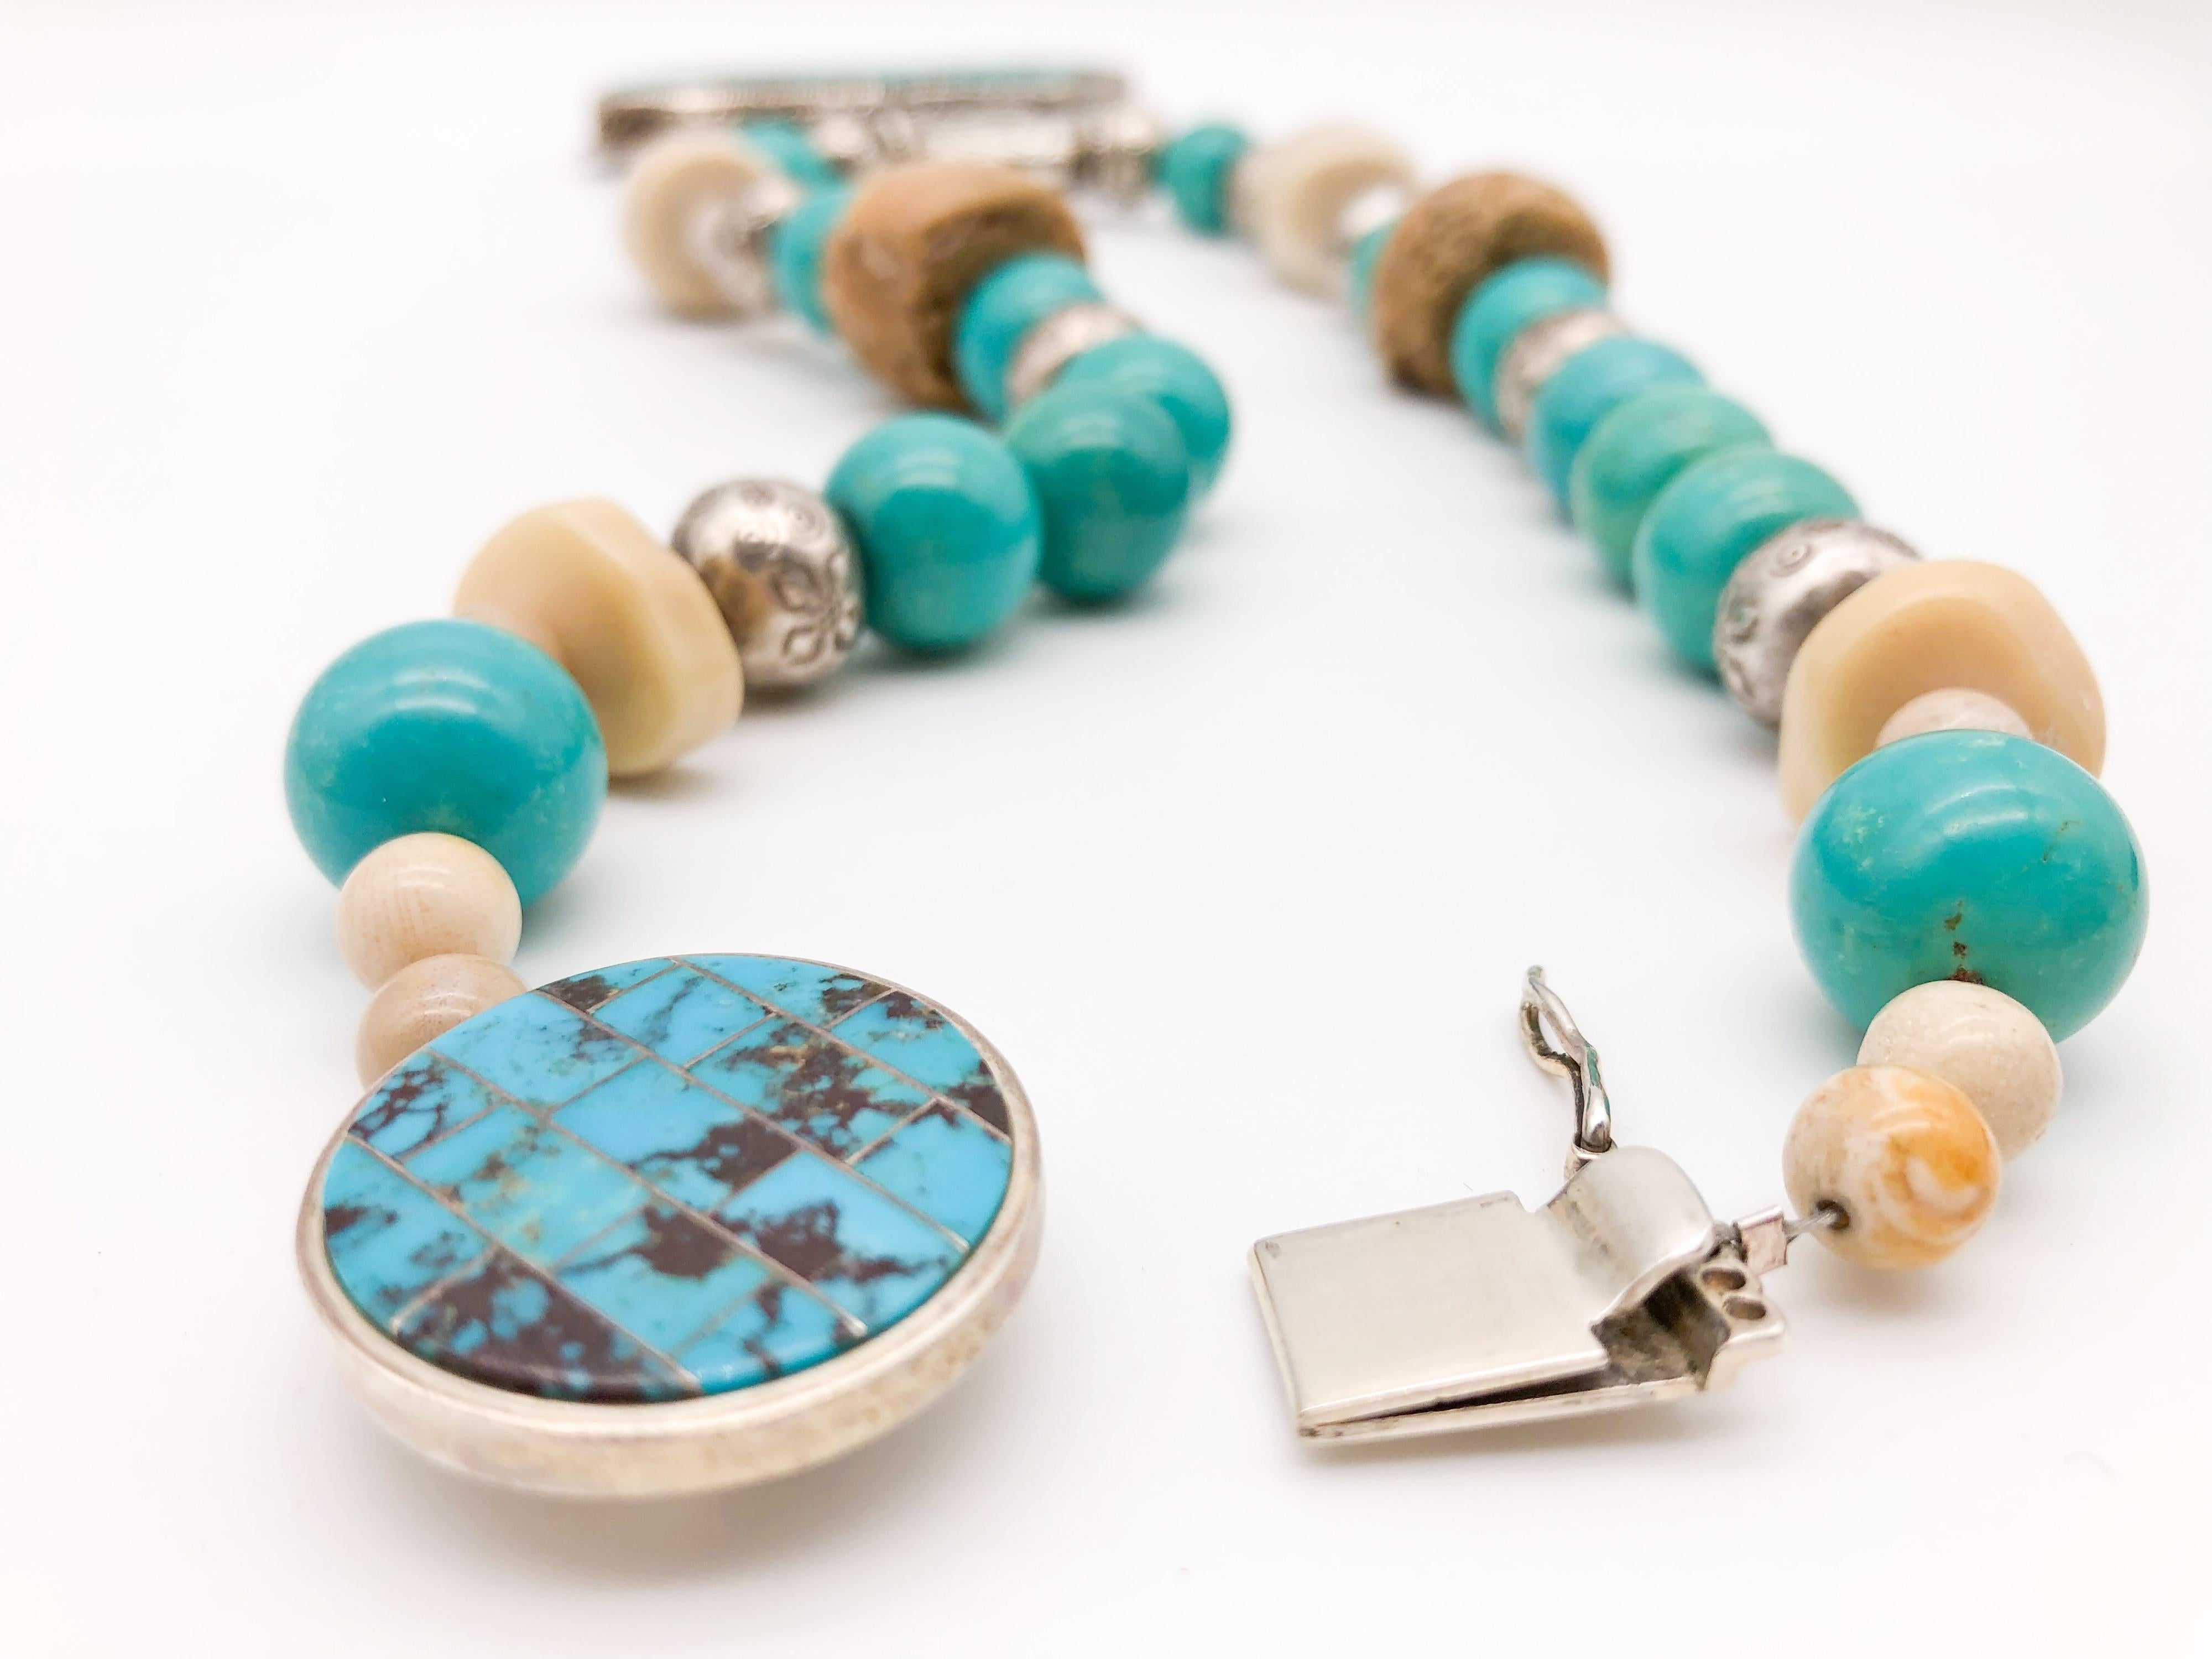 A.Jeschel Turquoise and Ethnic beads necklace with Tibetan Silver Bird Pendant   For Sale 4